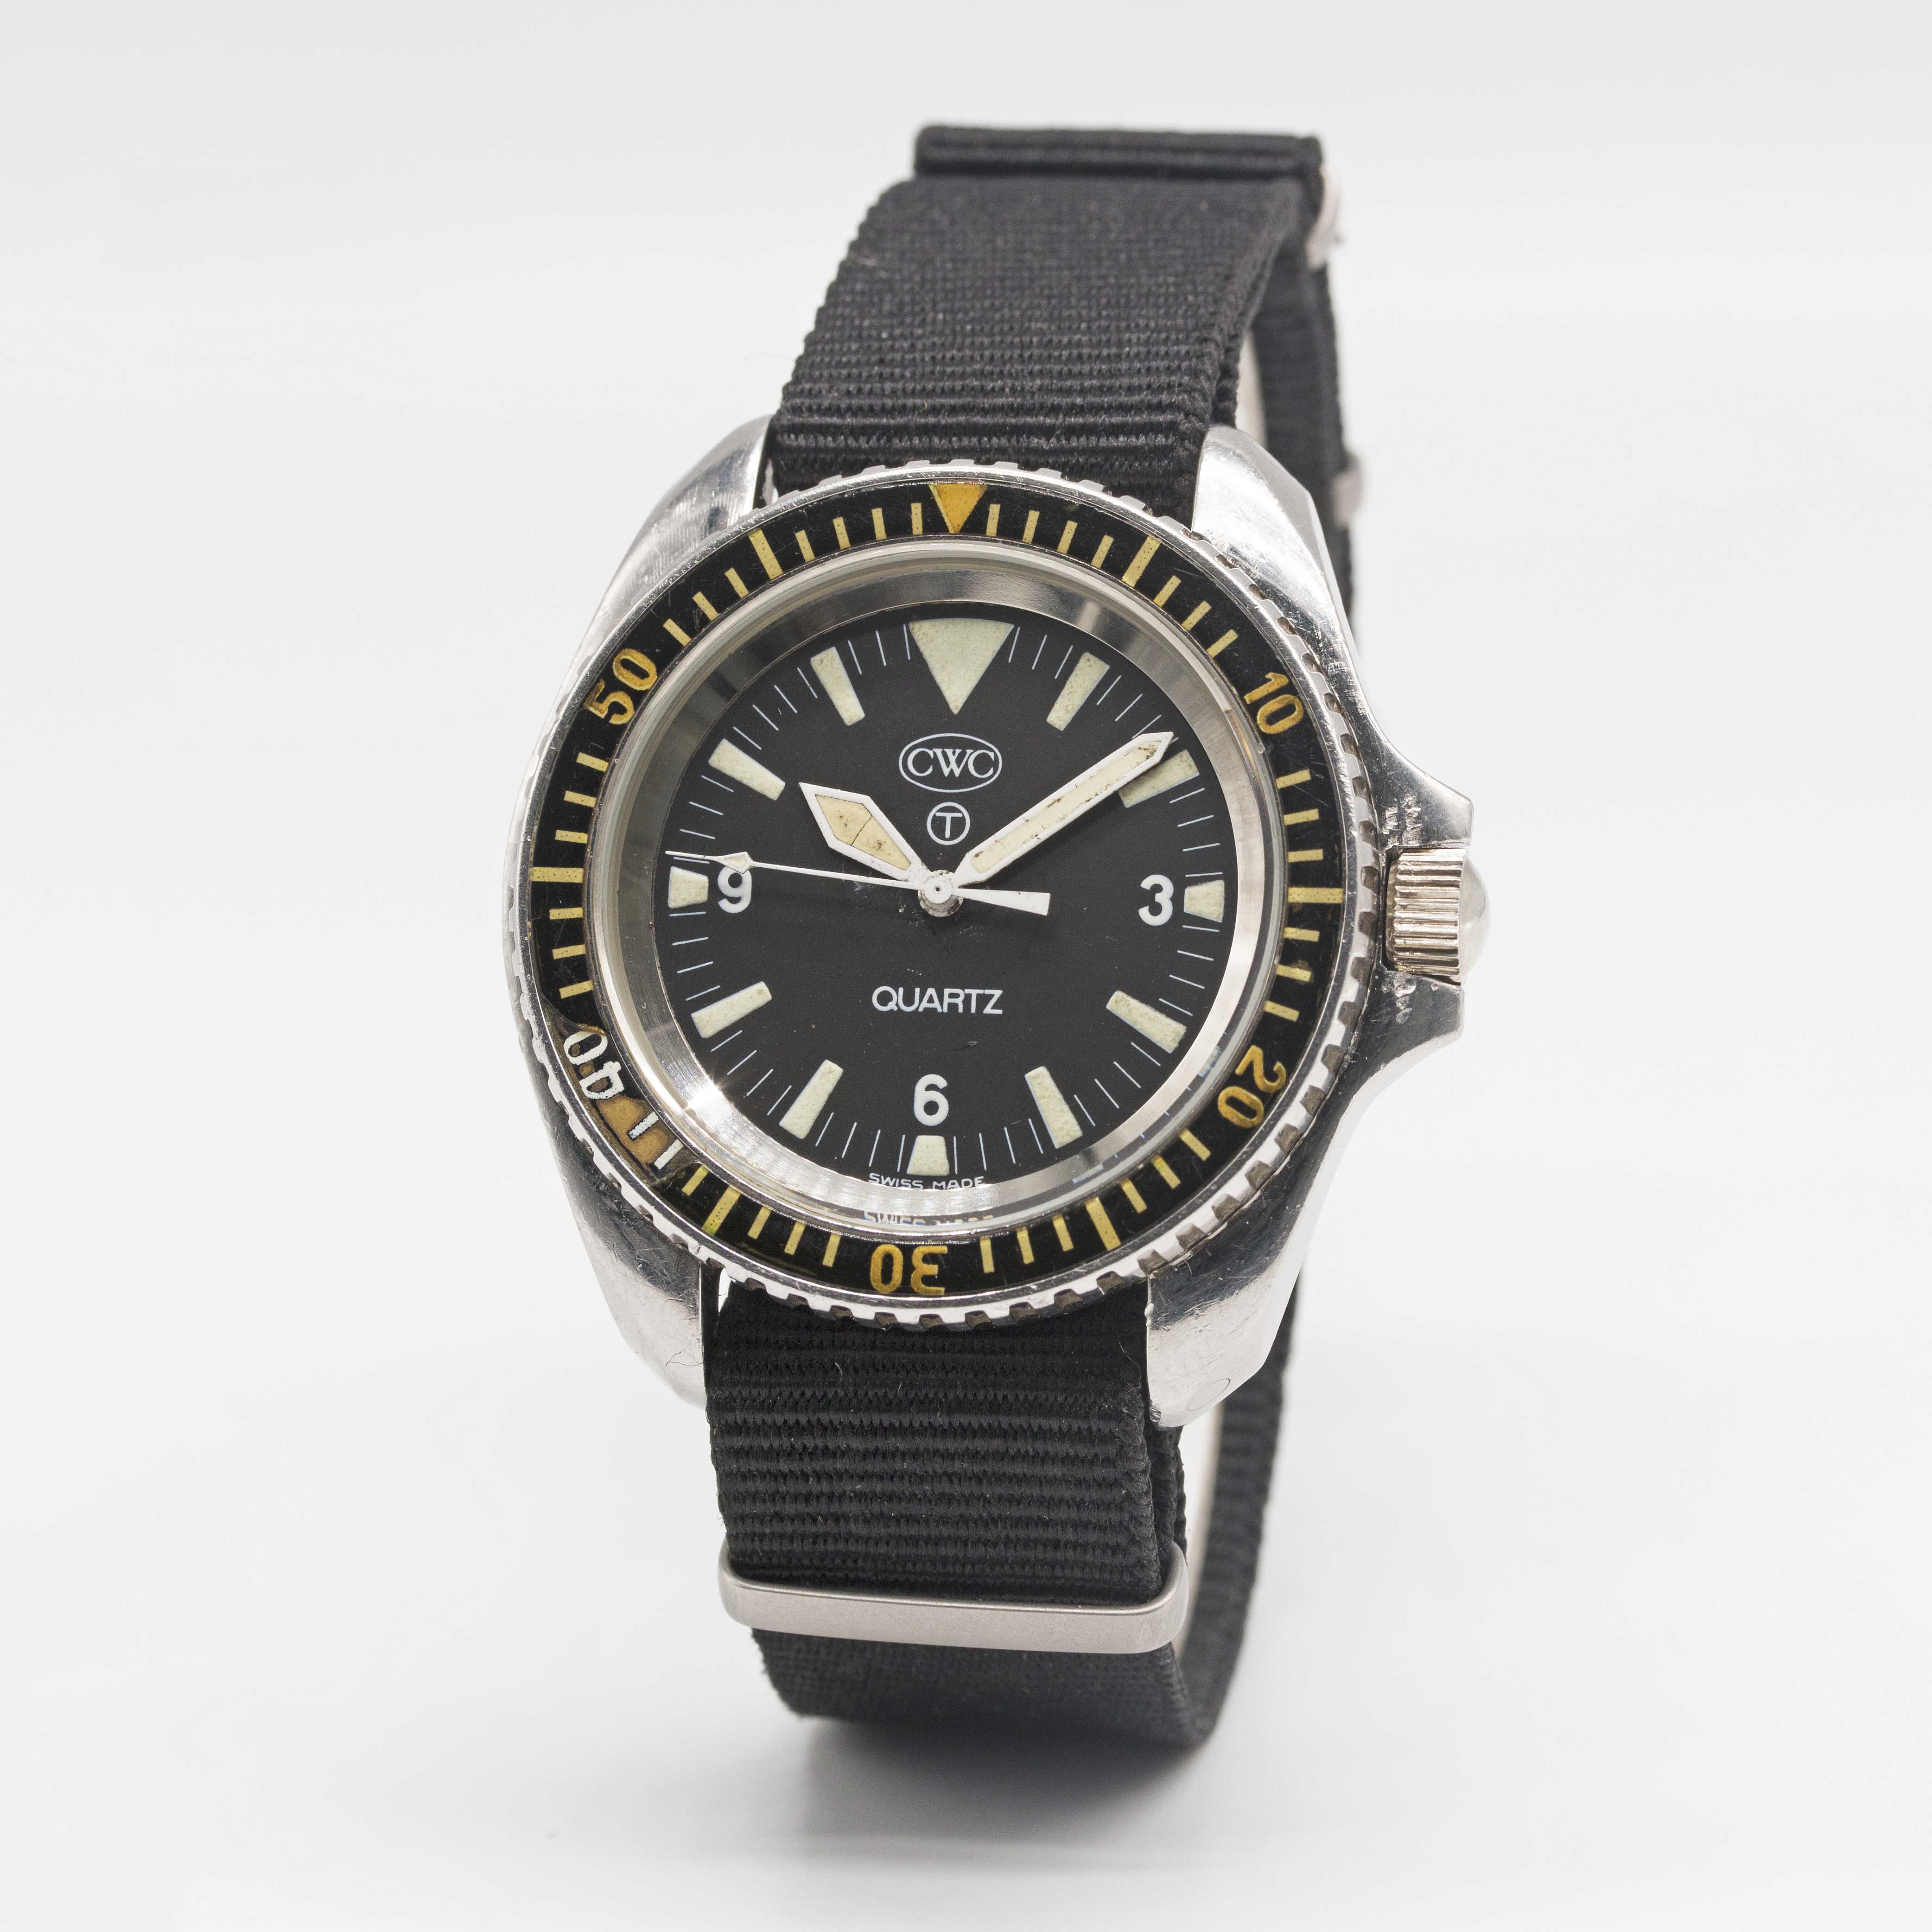 A RARE GENTLEMAN'S STAINLESS STEEL BRITISH MILITARY ROYAL NAVY CWC QUARTZ DIVERS WRIST WATCH DATED - Image 4 of 9